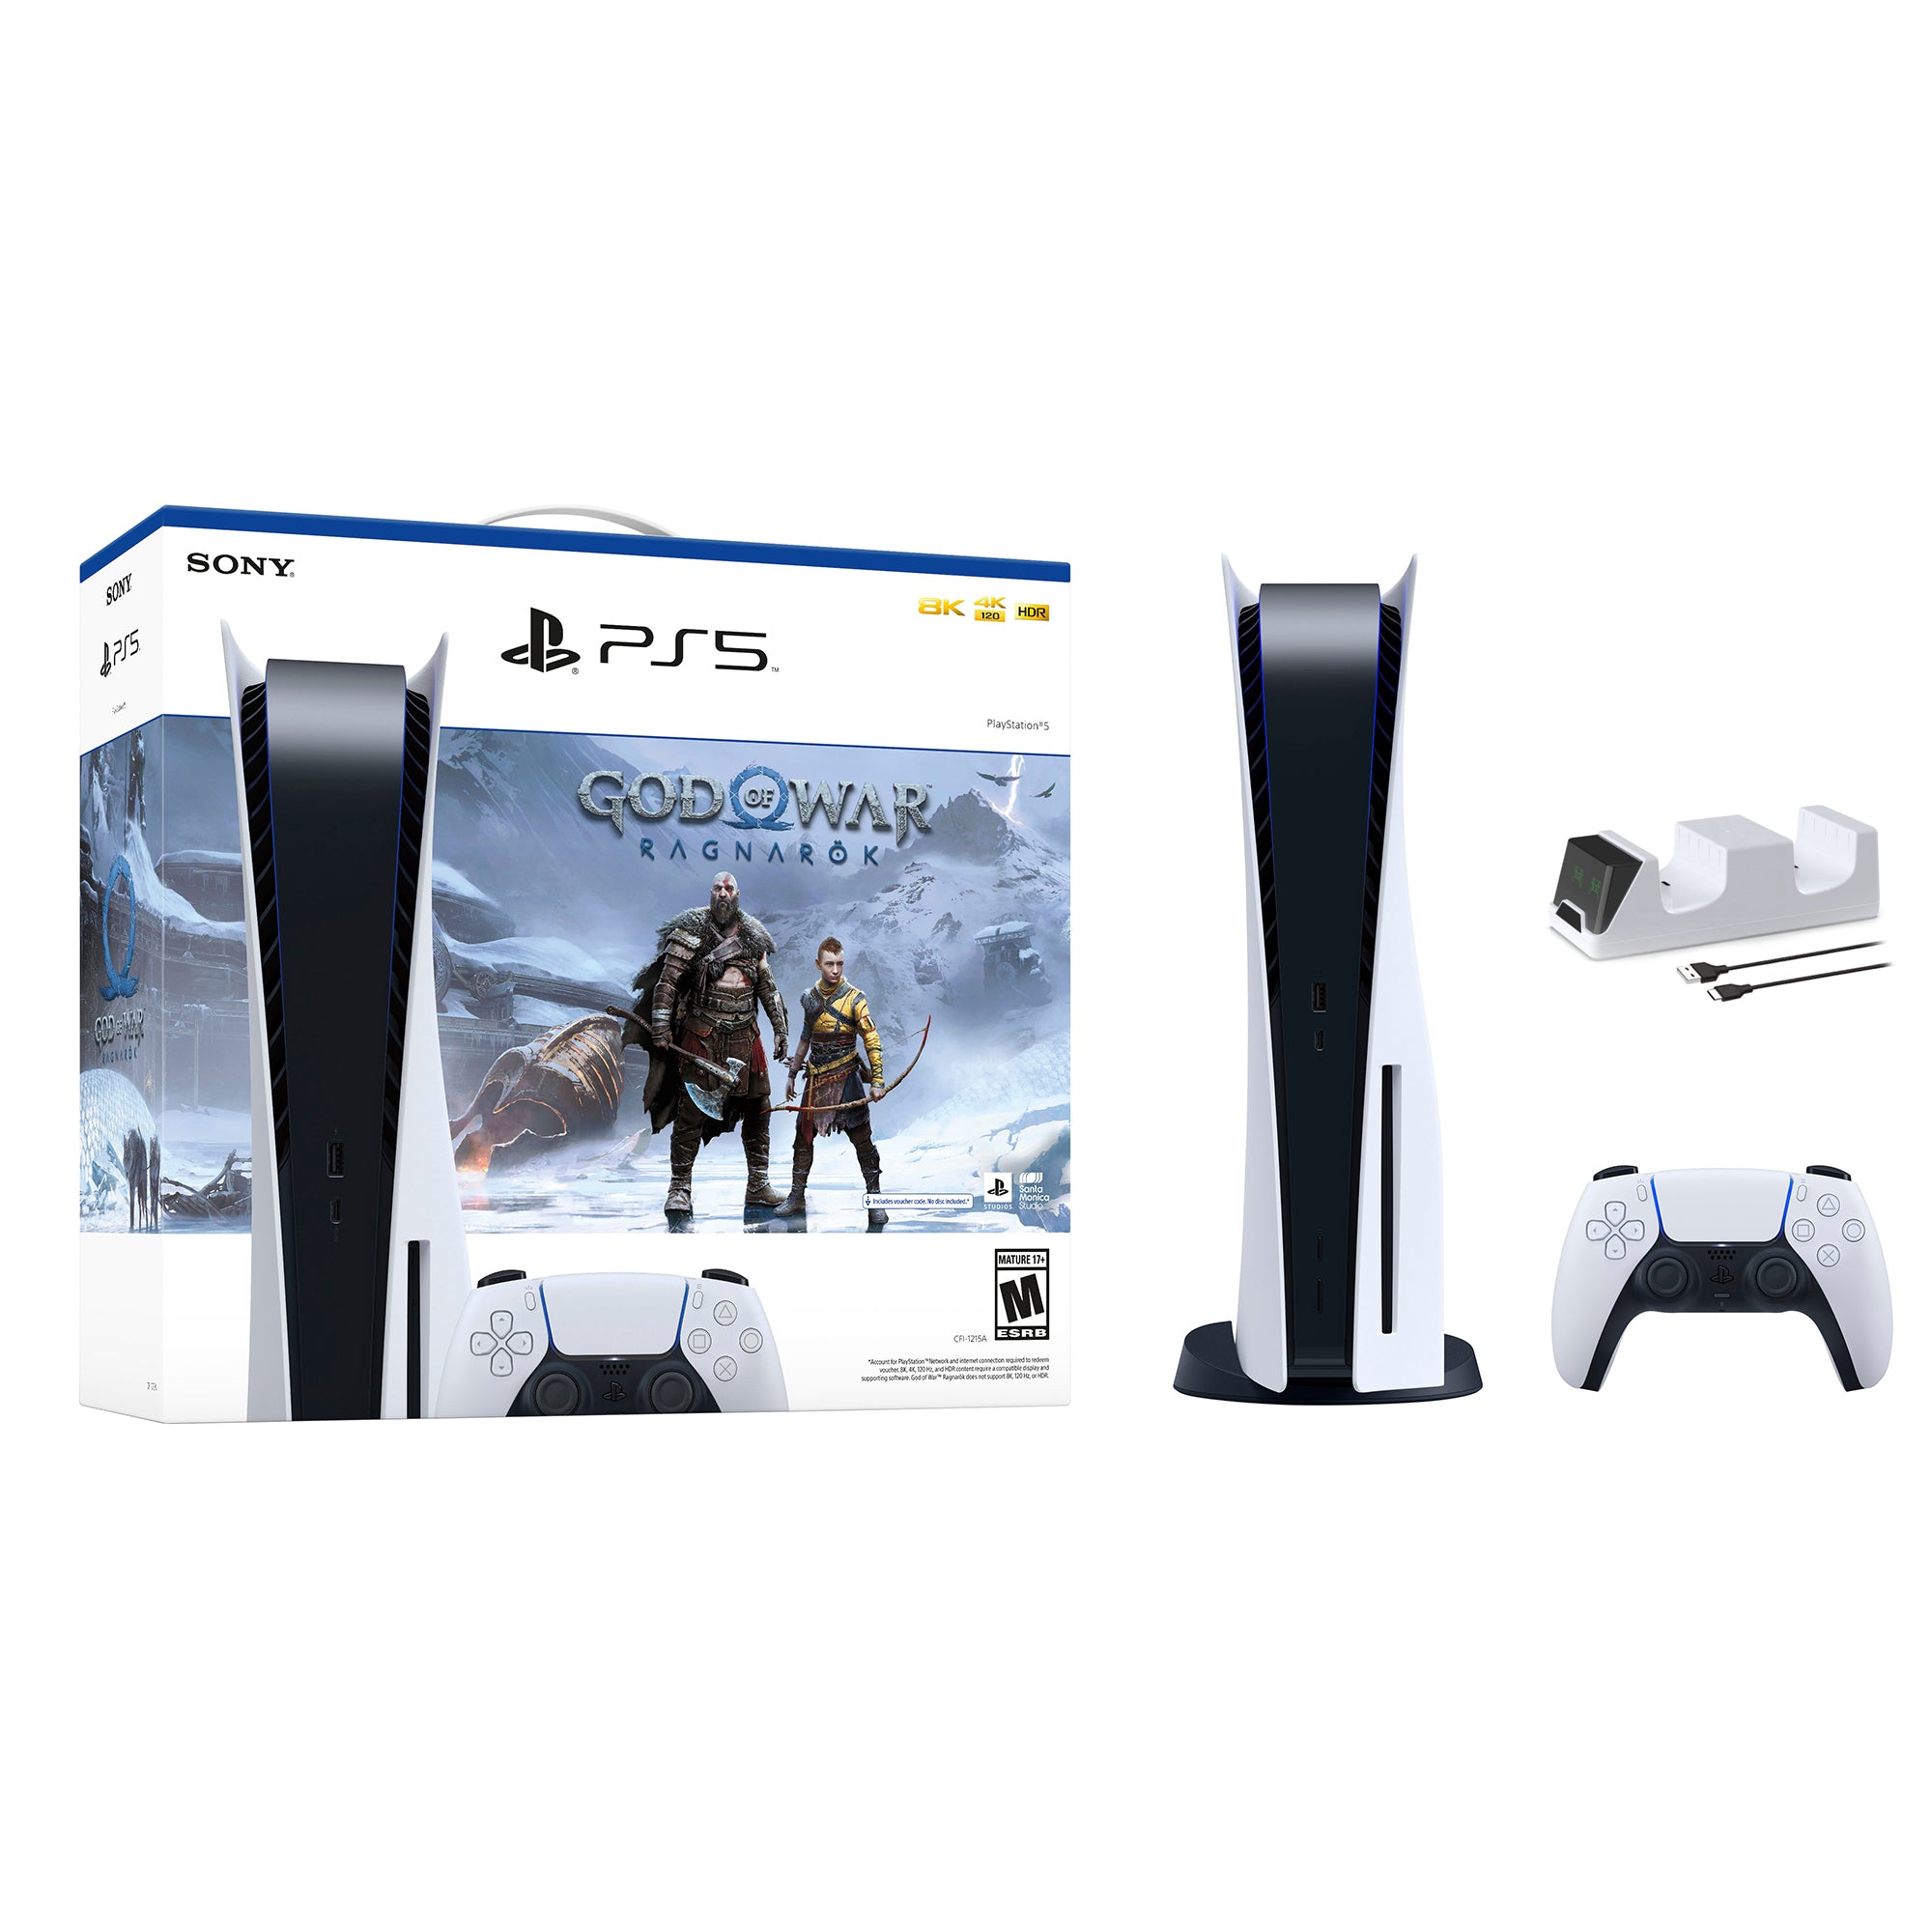 PlayStation 5 Disc Edition God of War Ragnarok Bundle and Mytrix Controller Charger - White, PS5 825GB Gaming Console